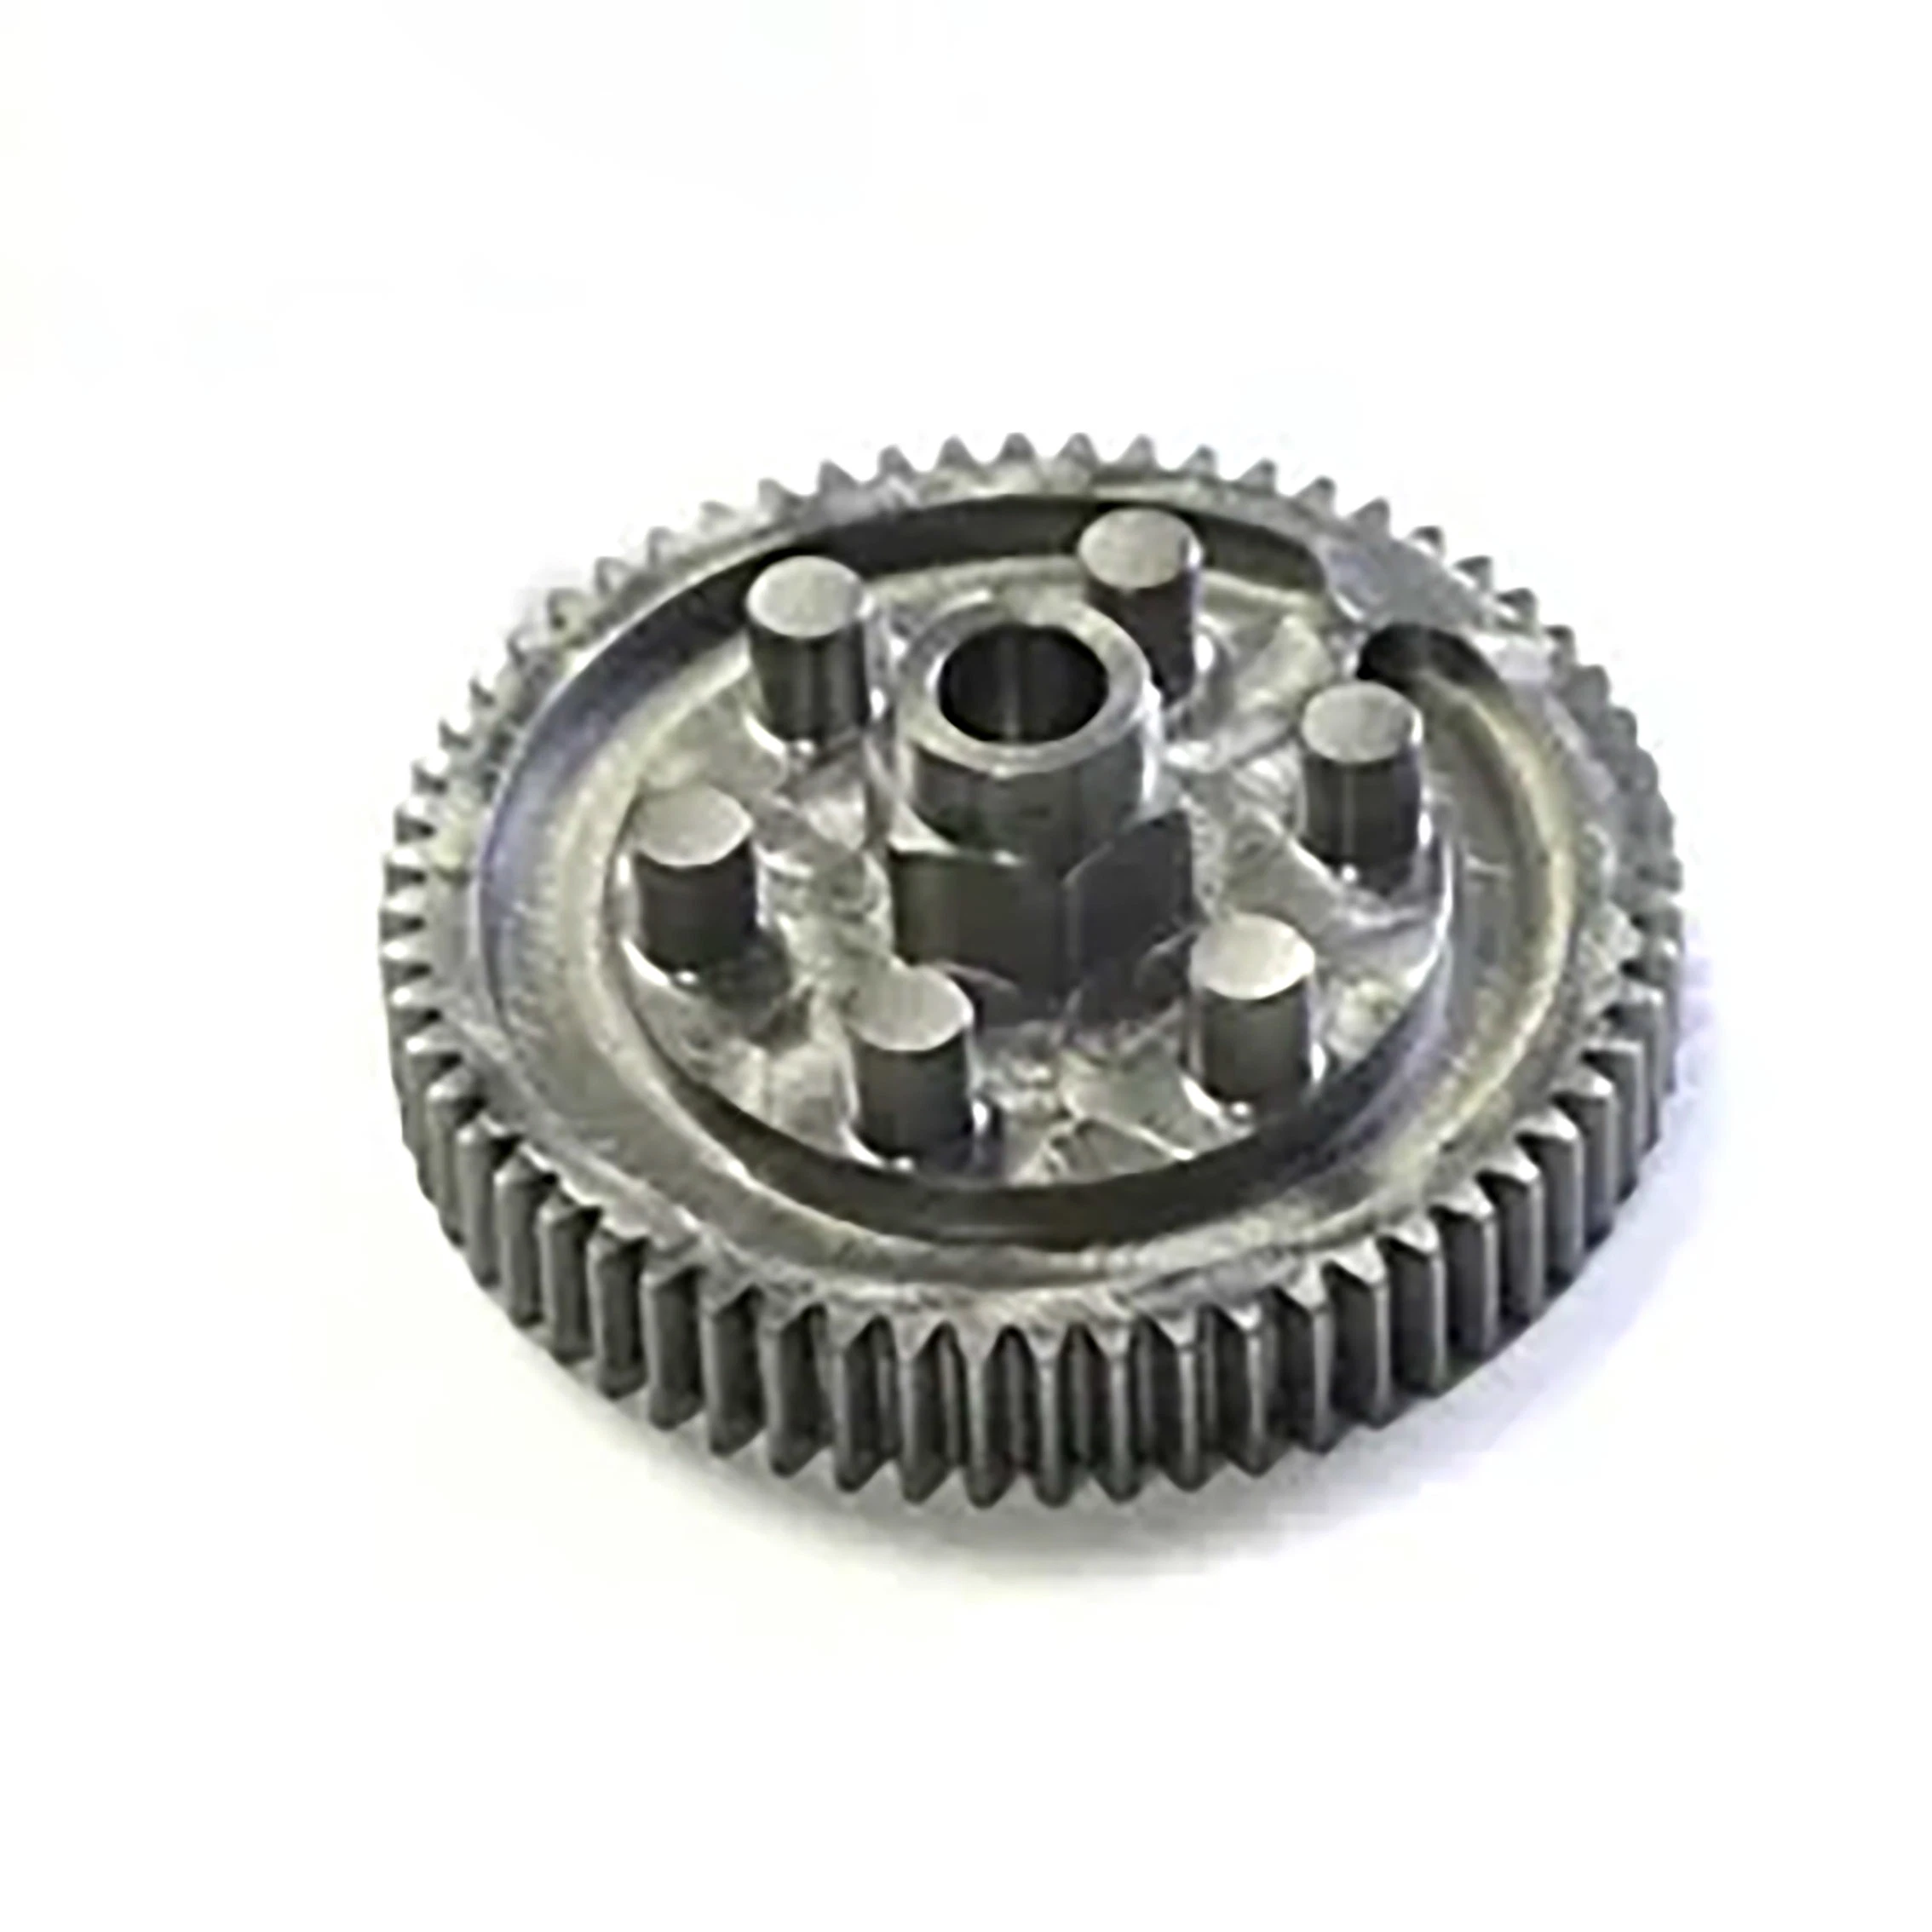 Factory OEM Industrial Machinery Parts Plastic/Brass Powdered Metallurgy Gears Metal Parts Internal Rack Pinion CNC Machining Parts (low price)